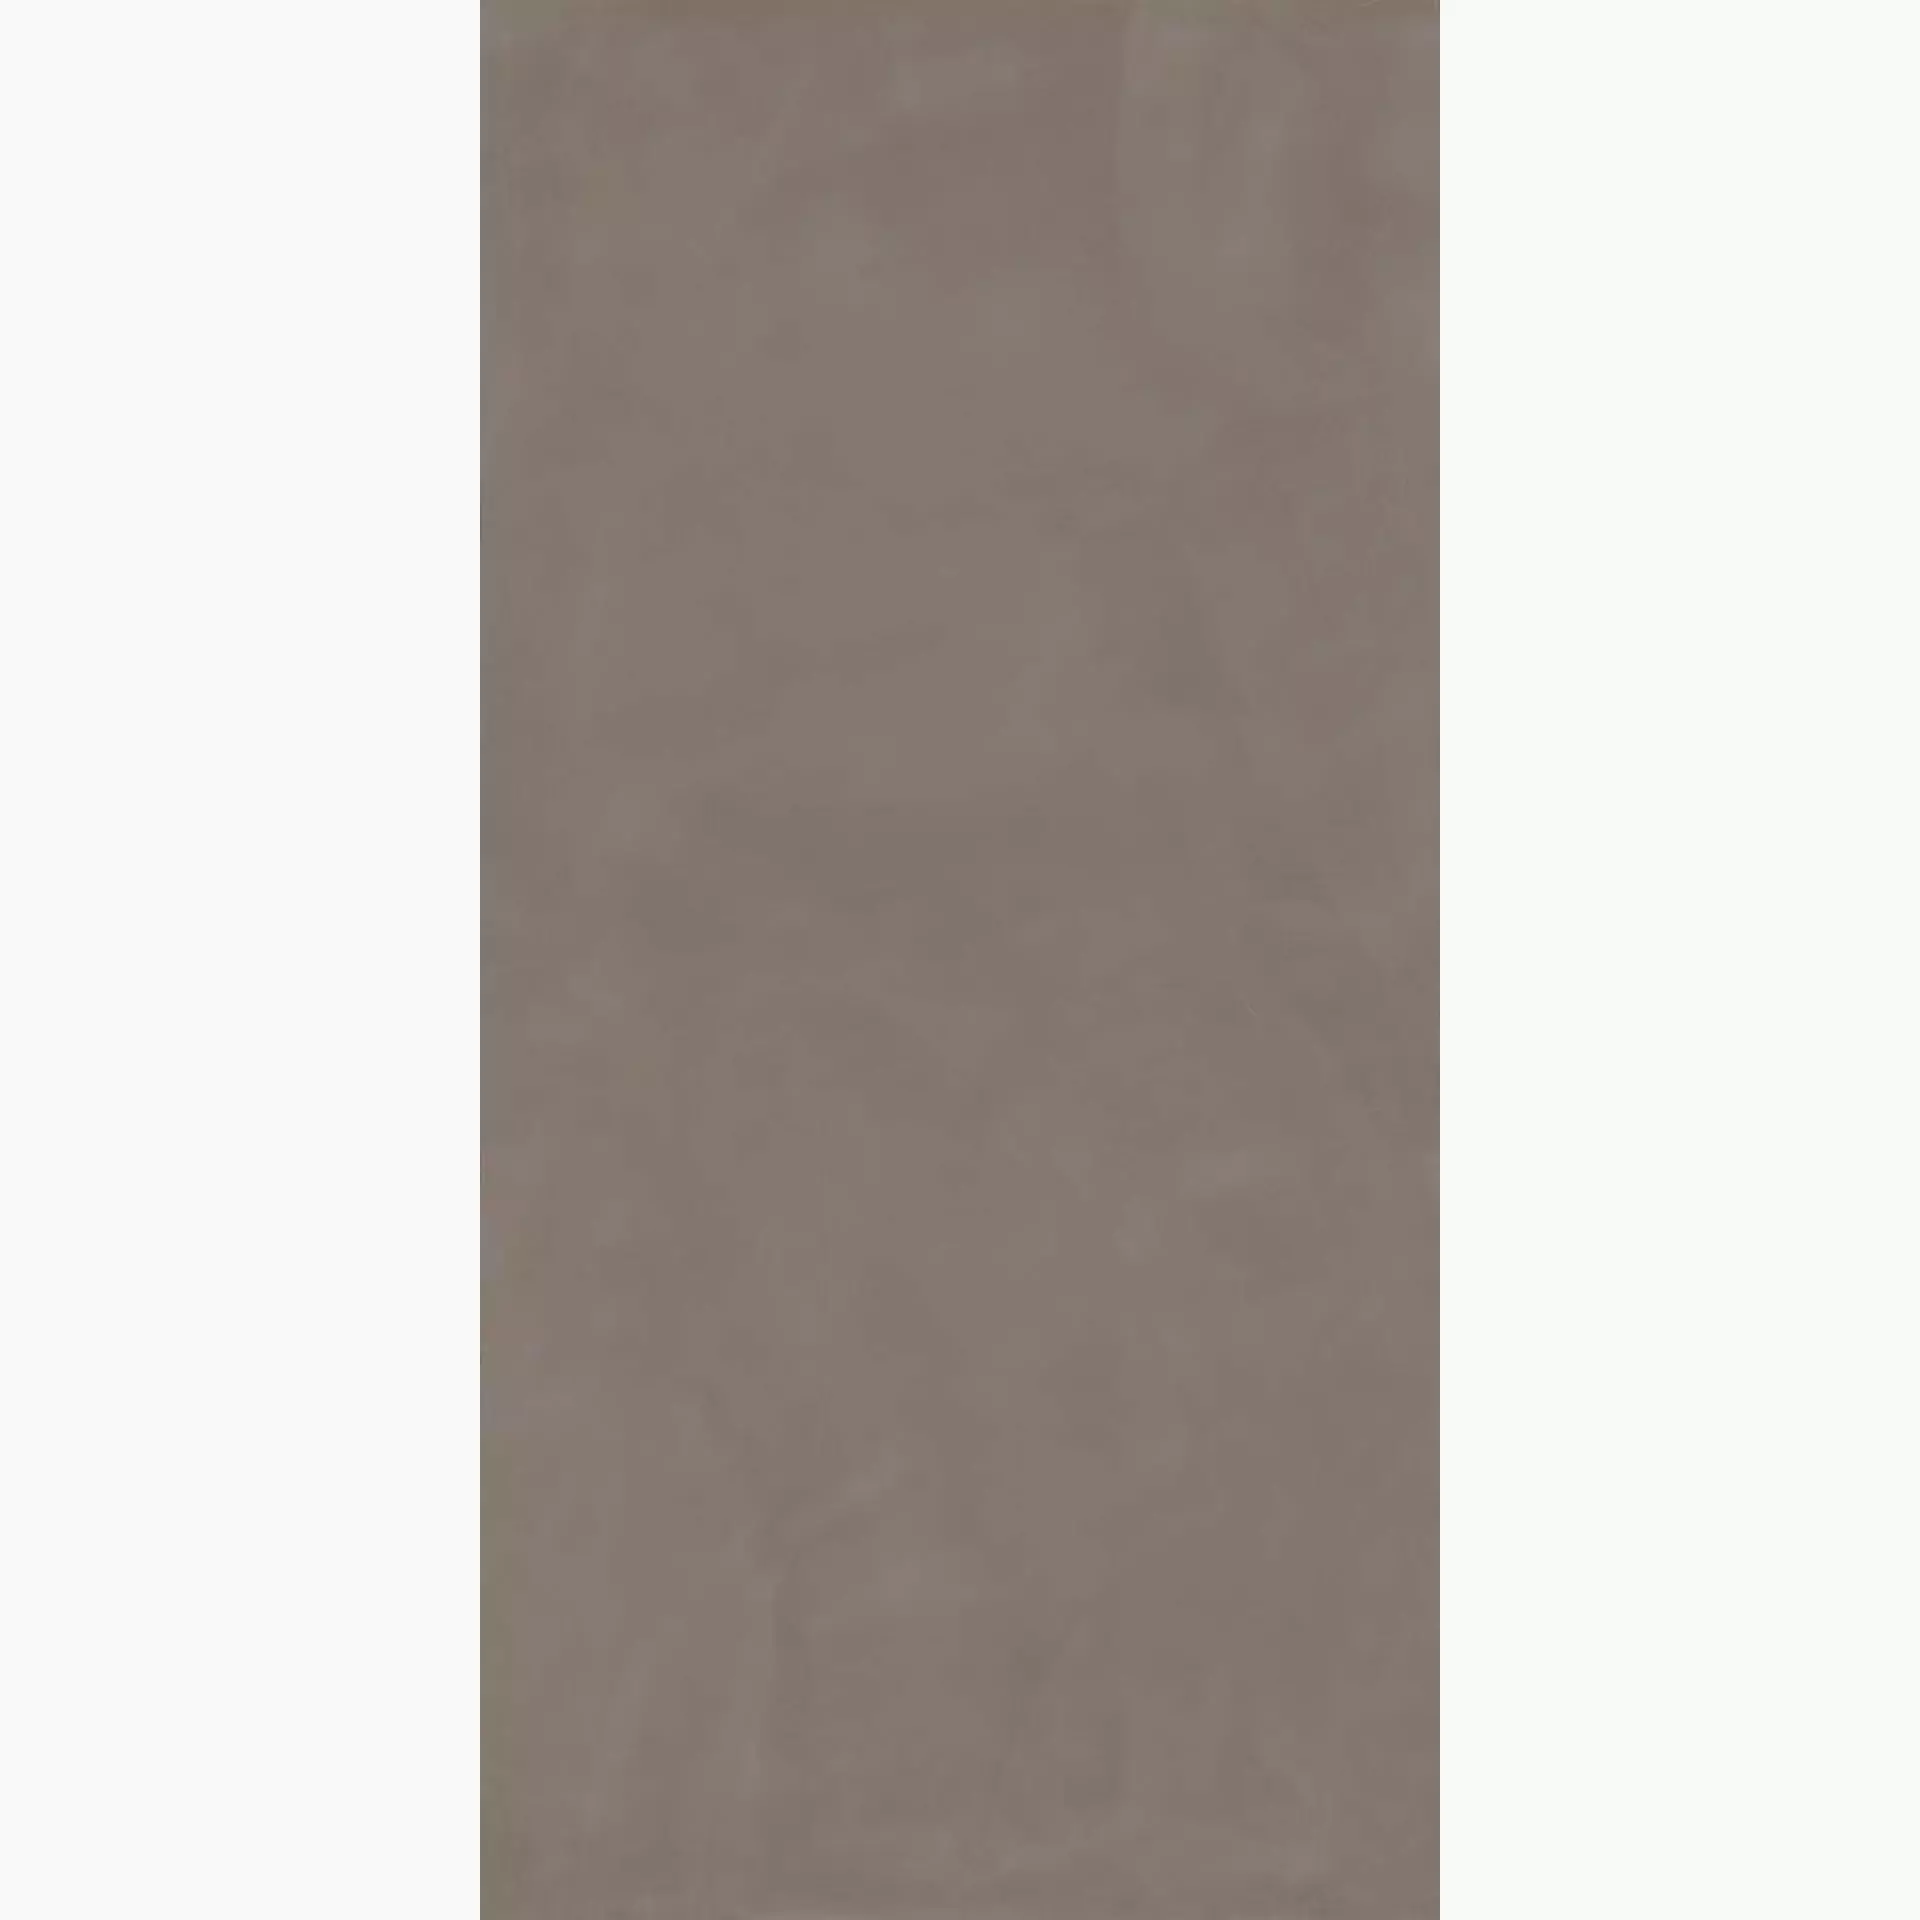 Fondovalle Res Art Mud Natural RES195 60x120cm rectified 6,5mm